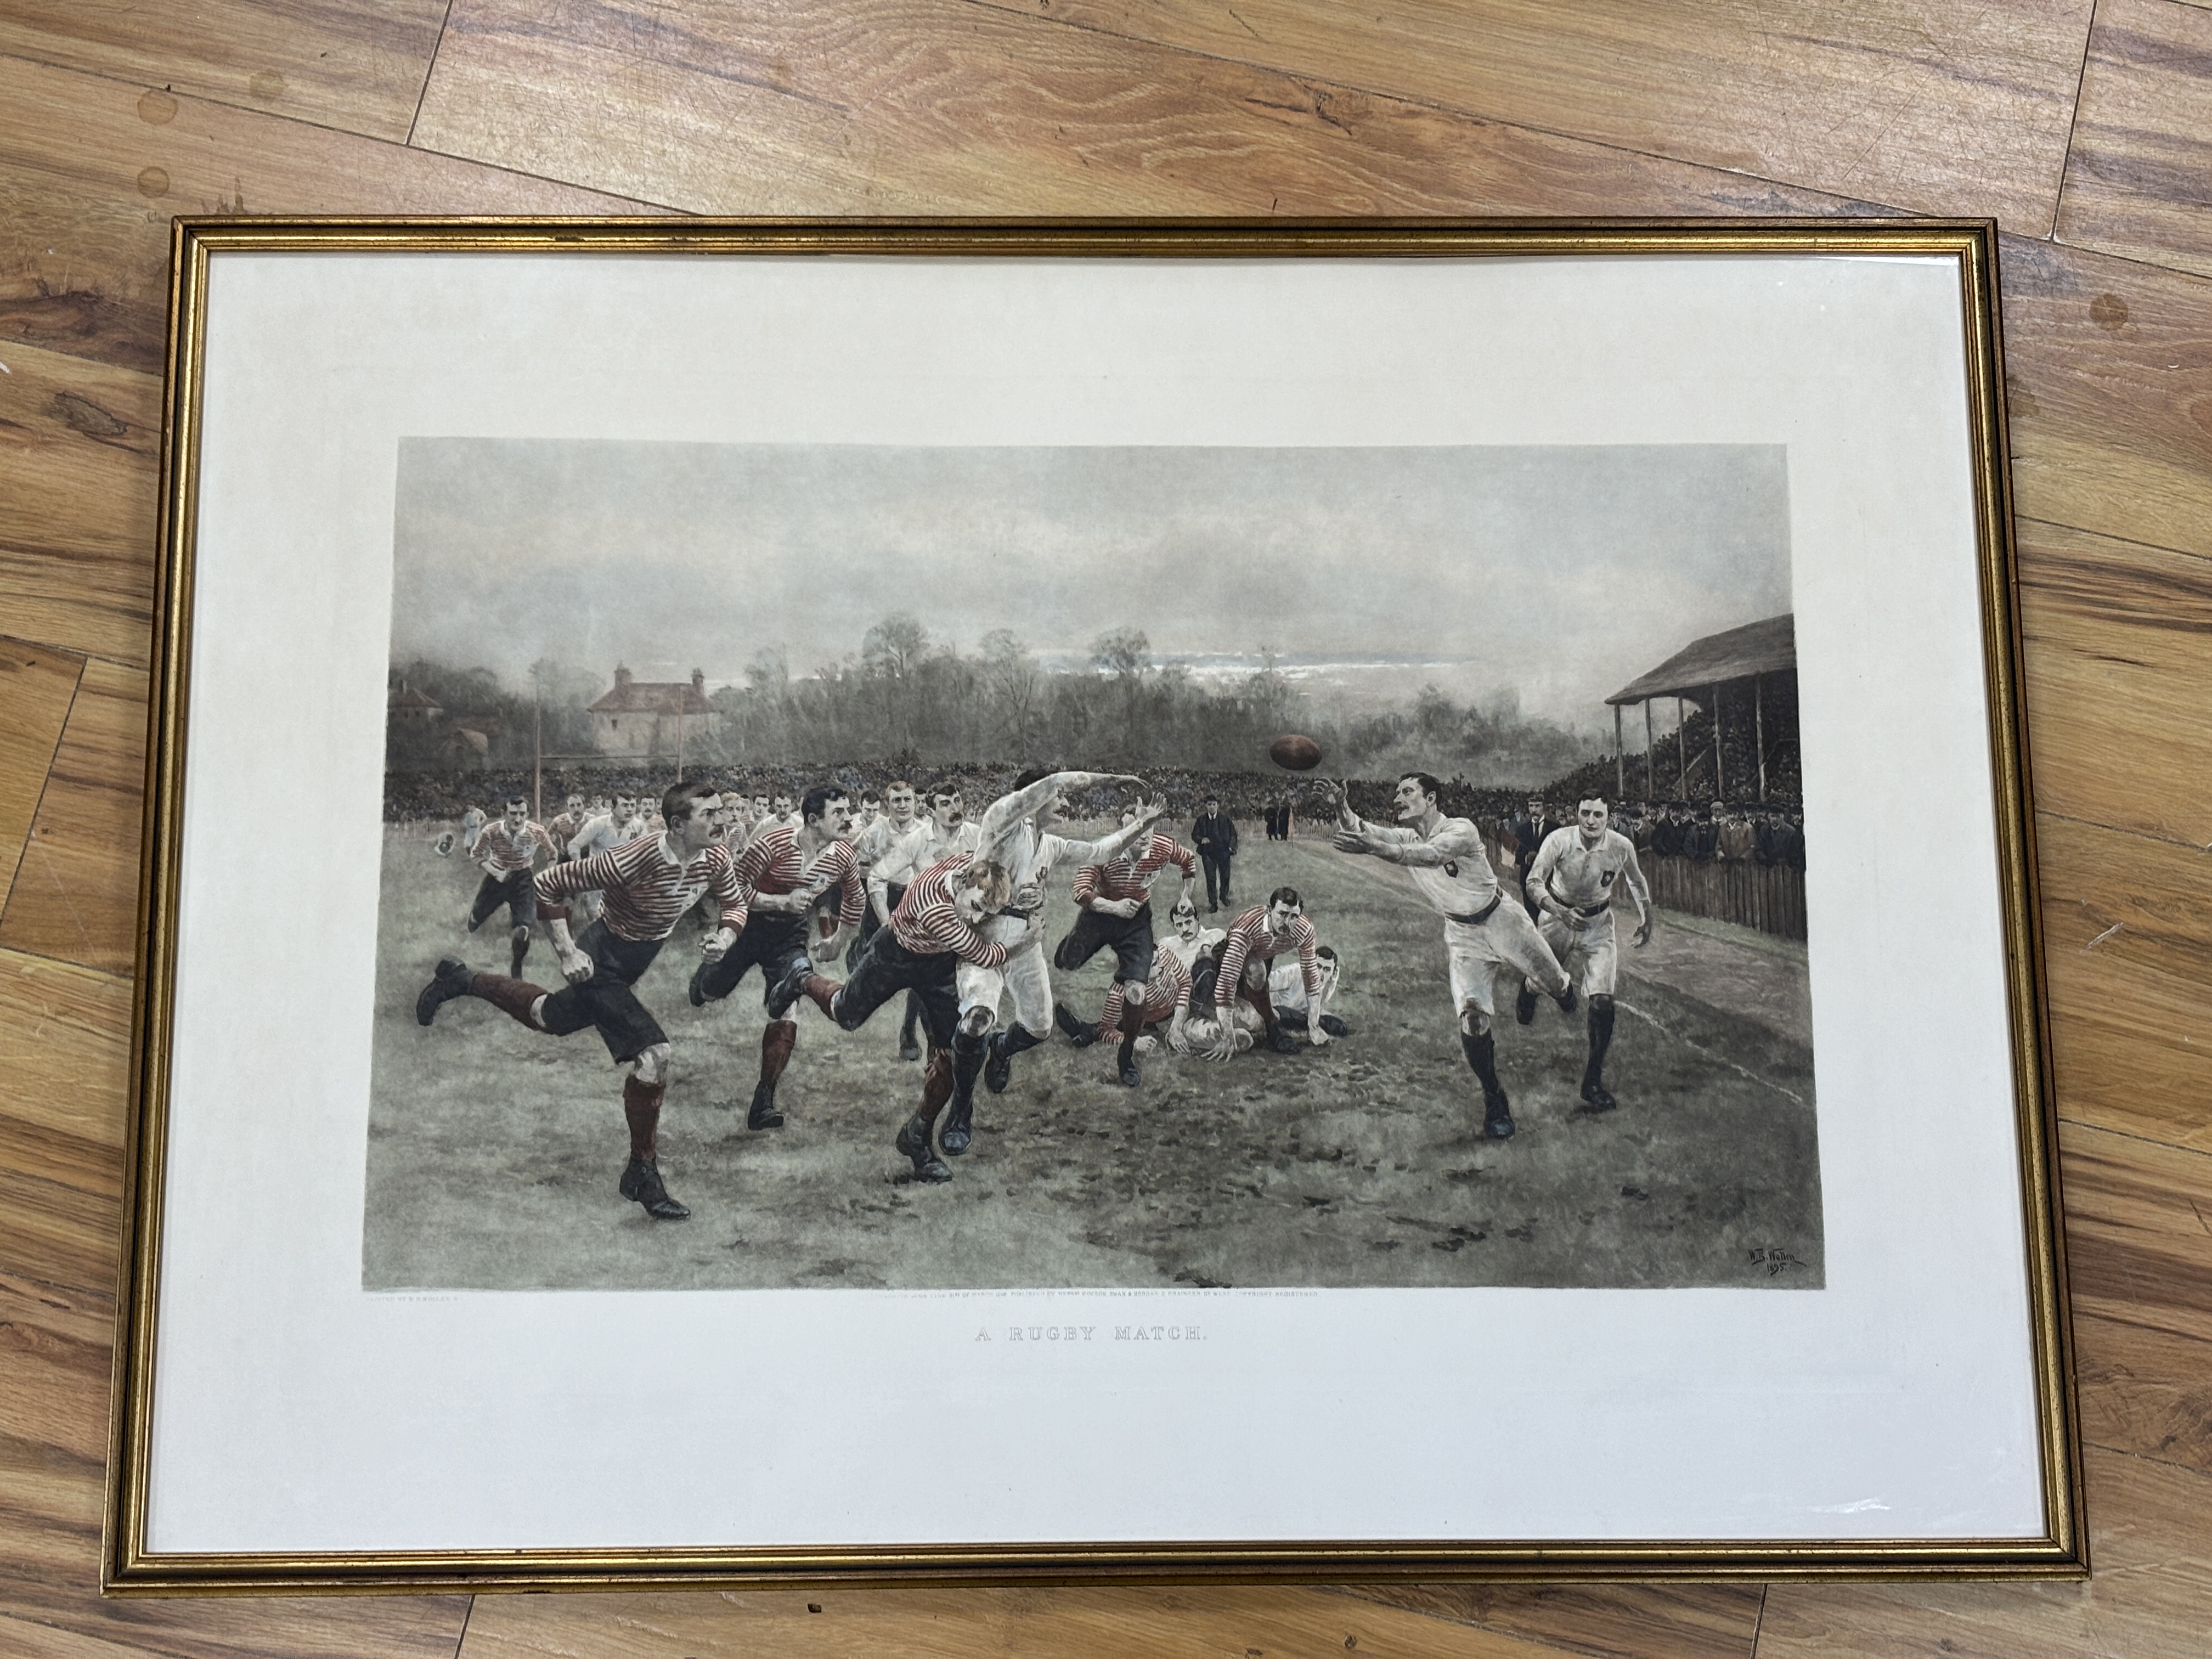 After William Barnes Wollen RI ROI (1857-1936), colour lithograph, ‘A Rugby Match’, publ. by Mawson, Swan & Morgan, 67 x 93cm